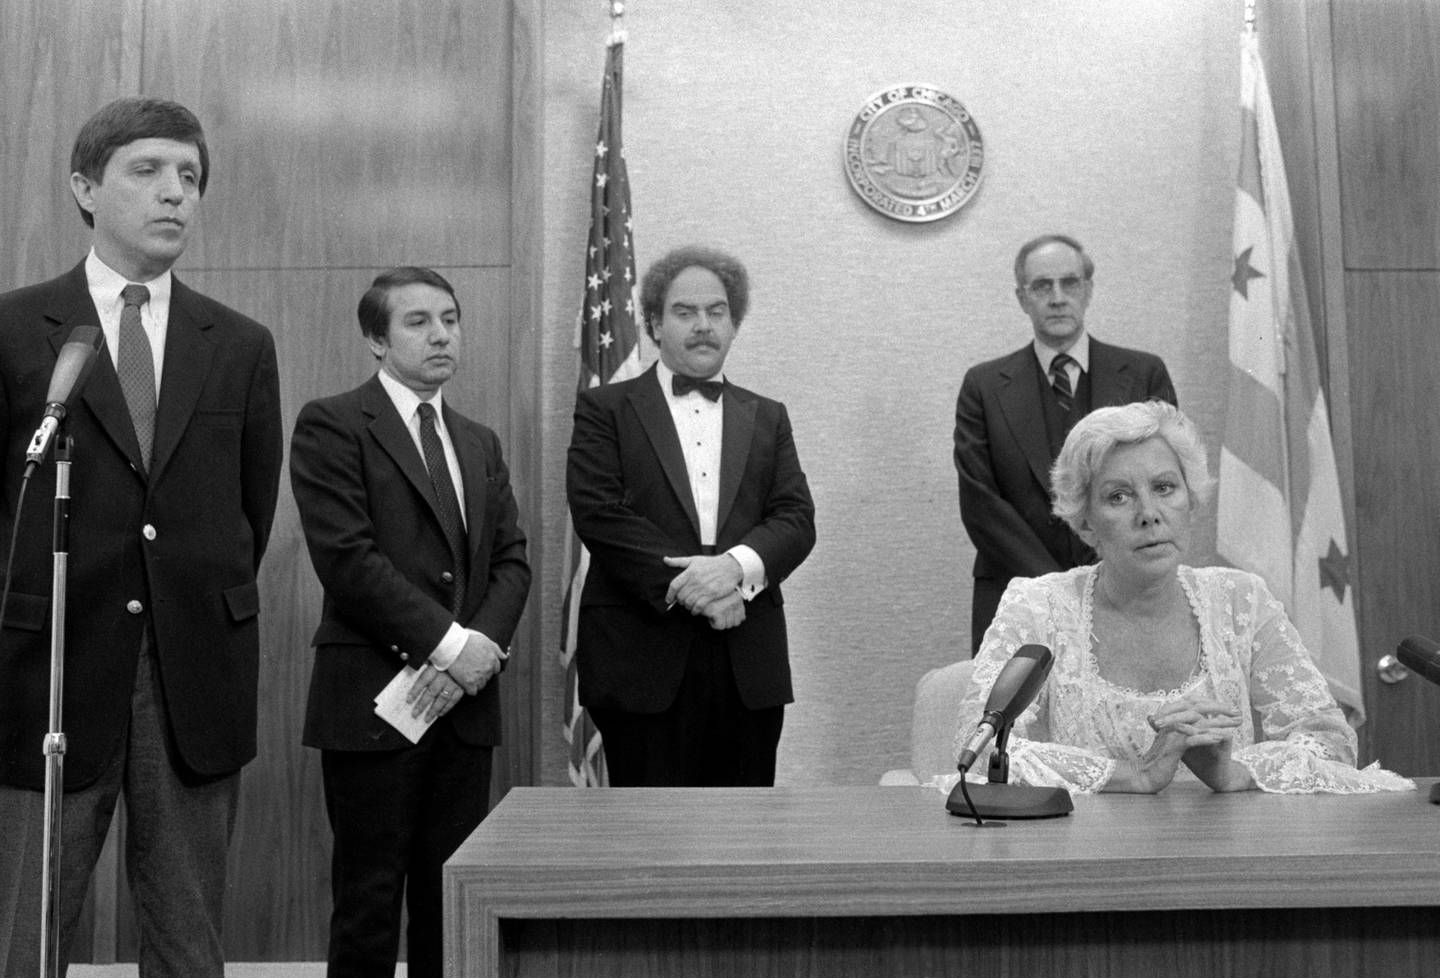 Chicago Mayor Jane Byrne, at right, holds a midnight news conference about a Chicago woman dying from tainted Tylenol. Chicago police Superintendent Richard Brzeczek is at left. Byrne is wearing a formal dress she'd donned for an evening event.